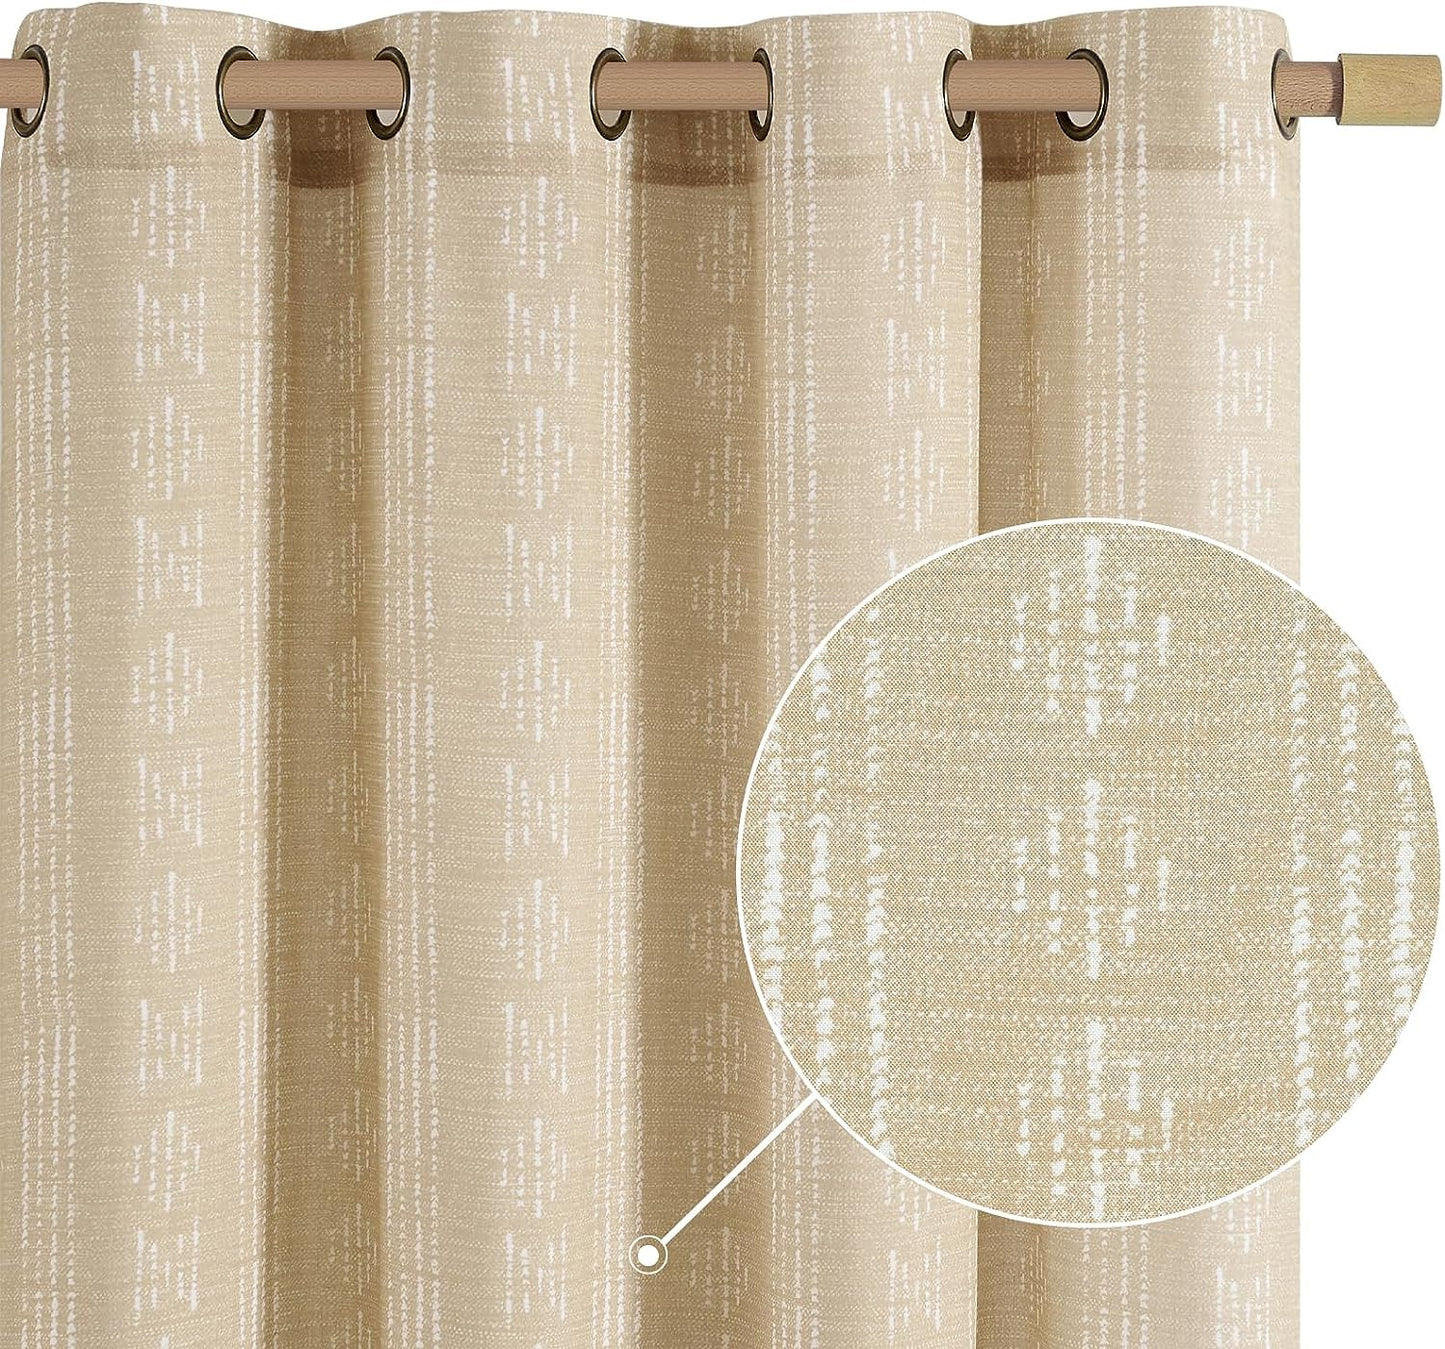 Jinchan Boho Curtains Linen Sliding Patio Door Curtains 84 Inches Long 1 Panel Divider Drapes Extra Wide Black Farmhouse Curtains for Living Room Geometric Striped Light Filtering Grommet Curtains  CKNY HOME FASHION Boho| Beige W52 X L63 